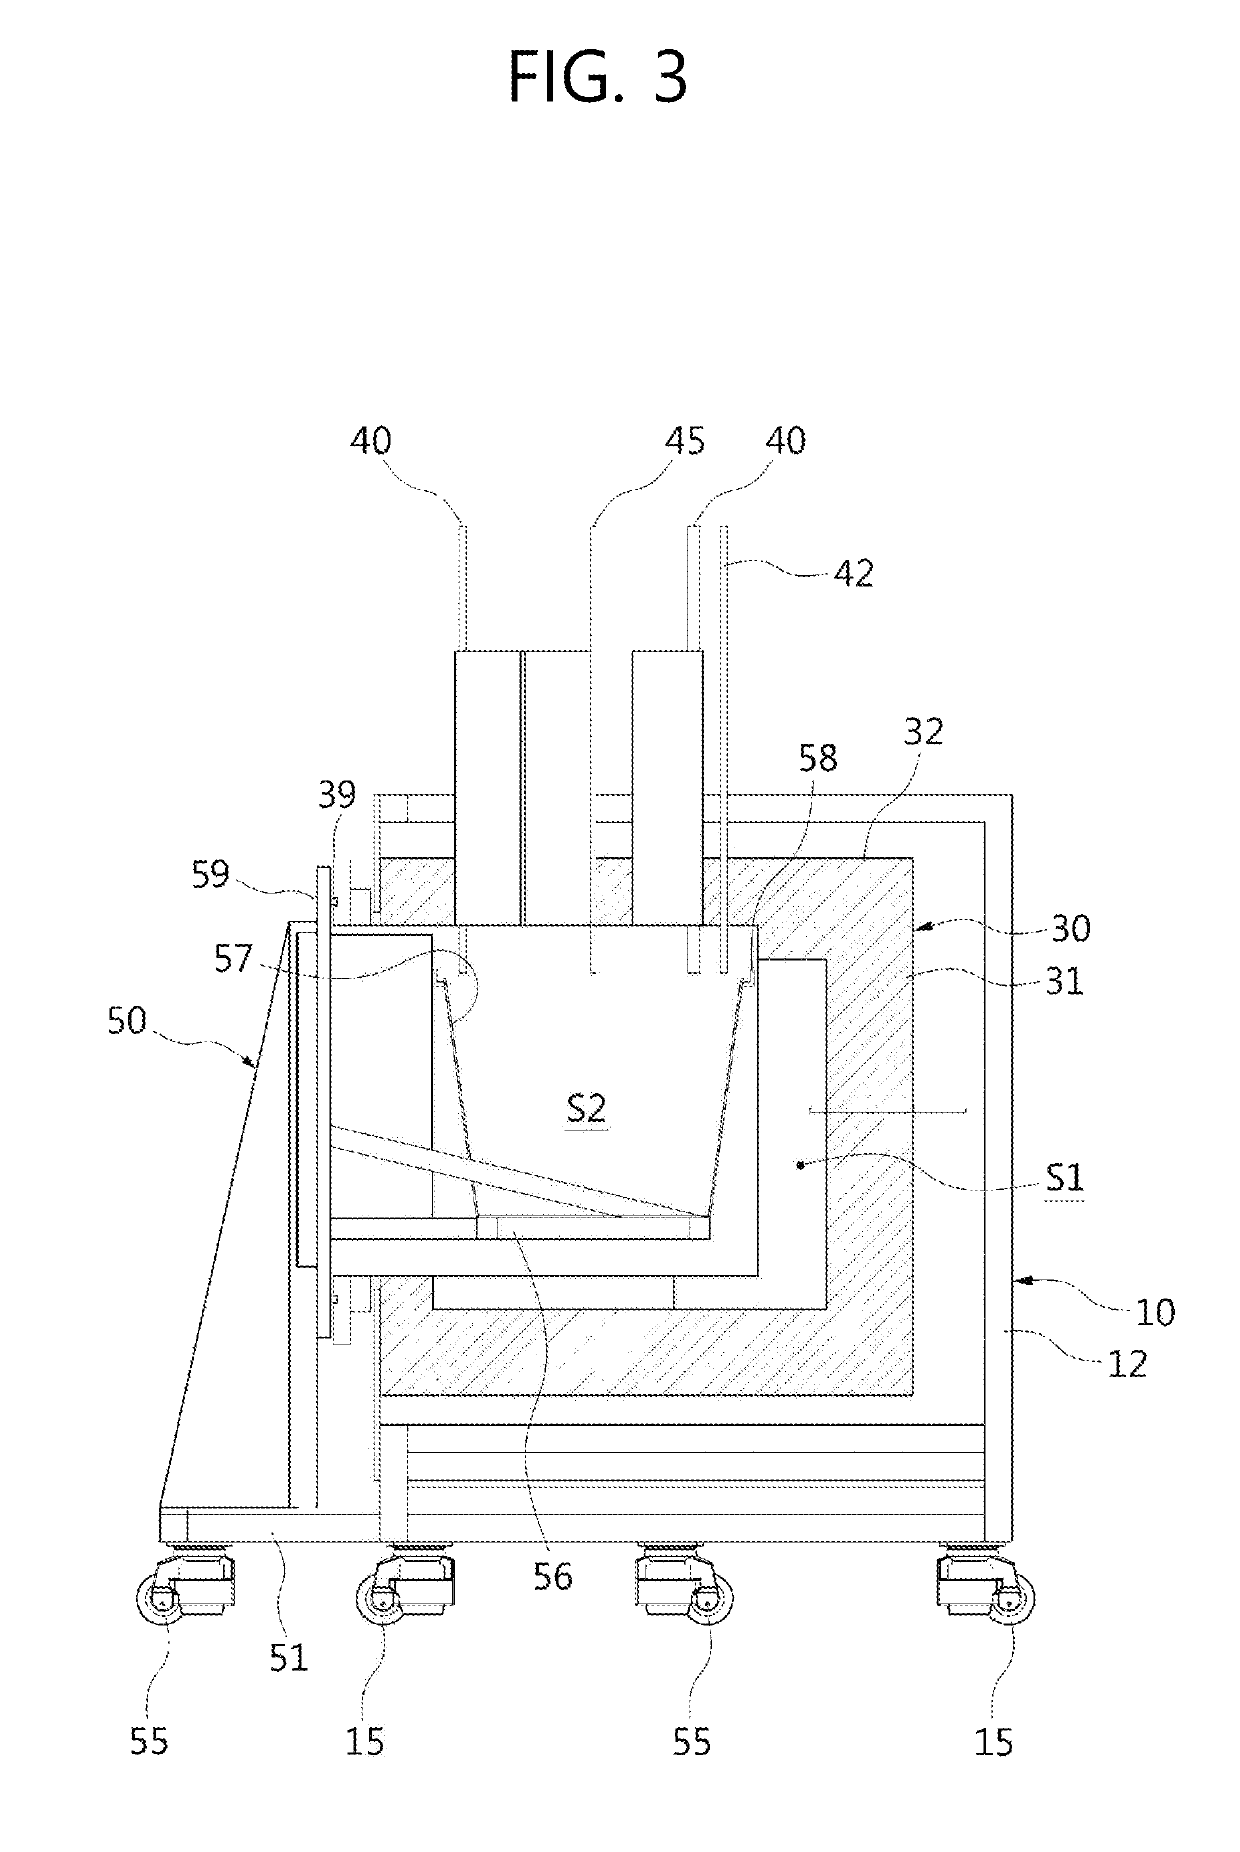 Waste battery treatment apparatus using continuous heat treatment, and method for recovering valuable metals from lithium-based battery using same